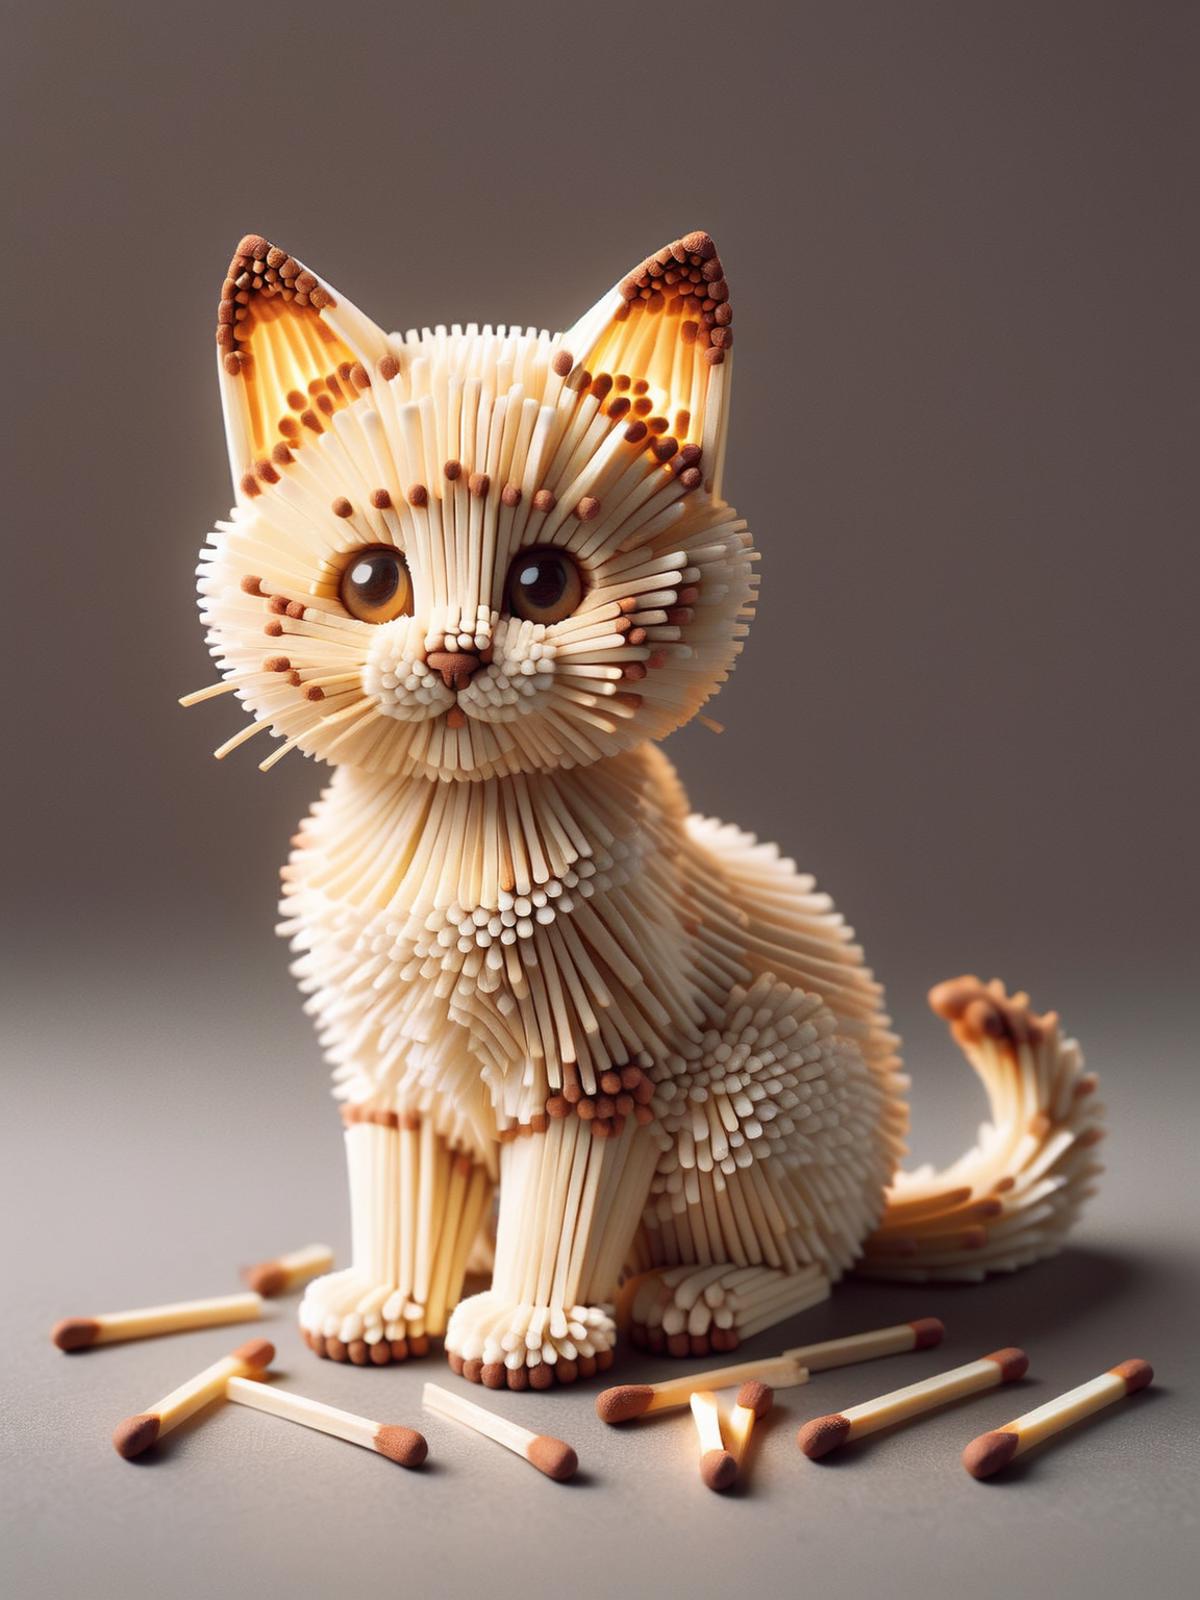 A Cat Made Out of Toothpicks - Cute and Unique Decoration